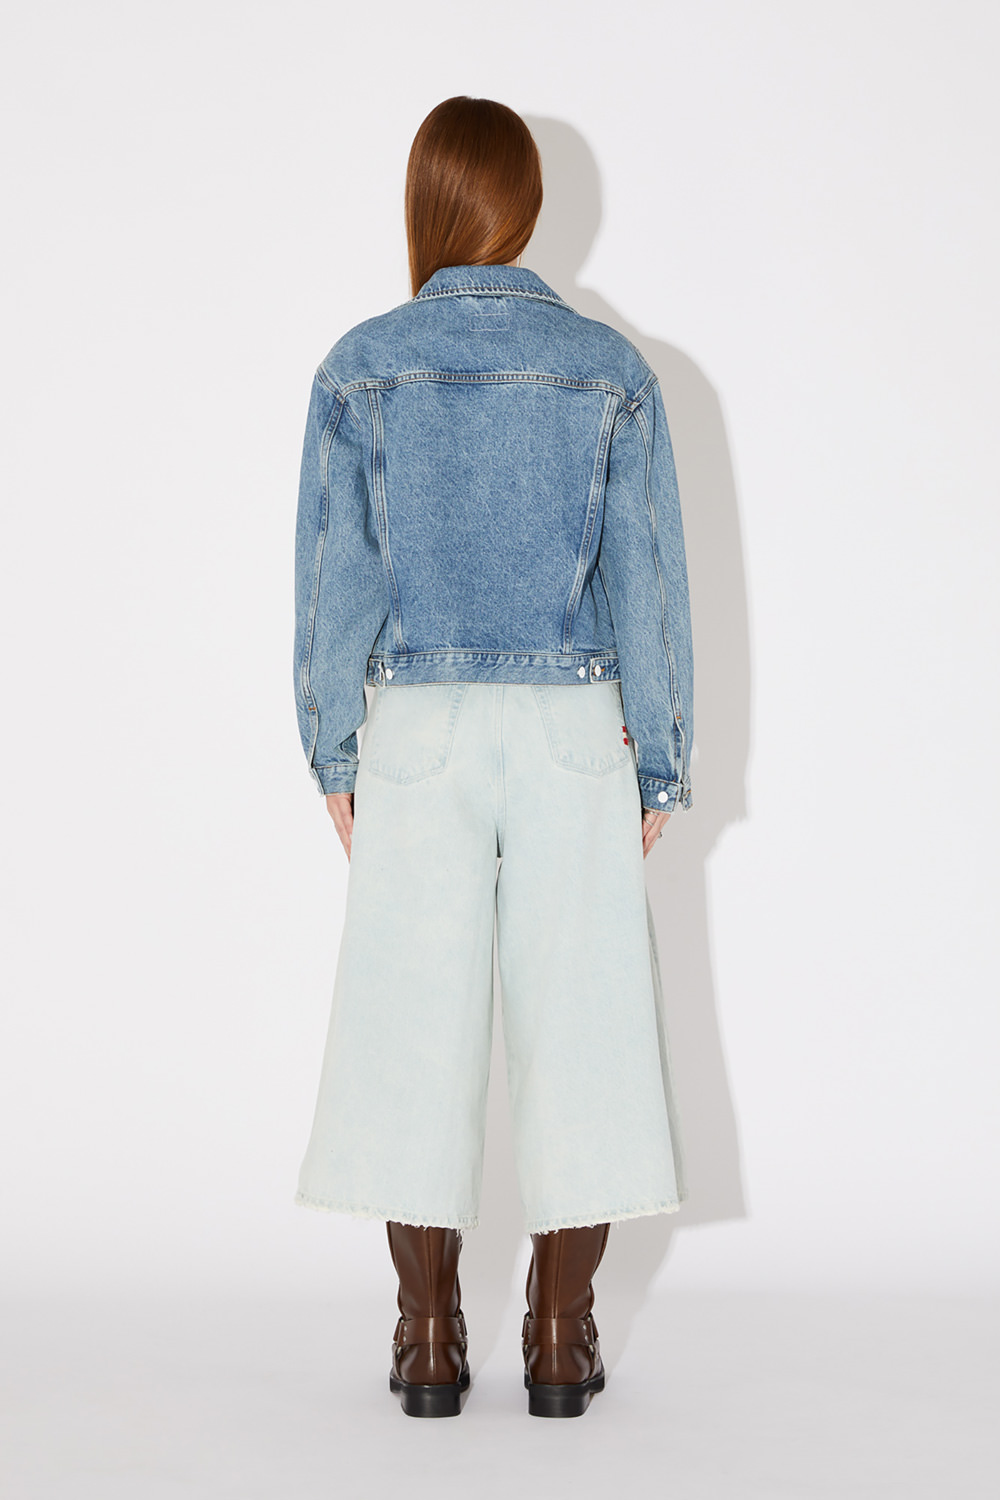 AMISH: GIACCA CROPPED REAL VINTAGE